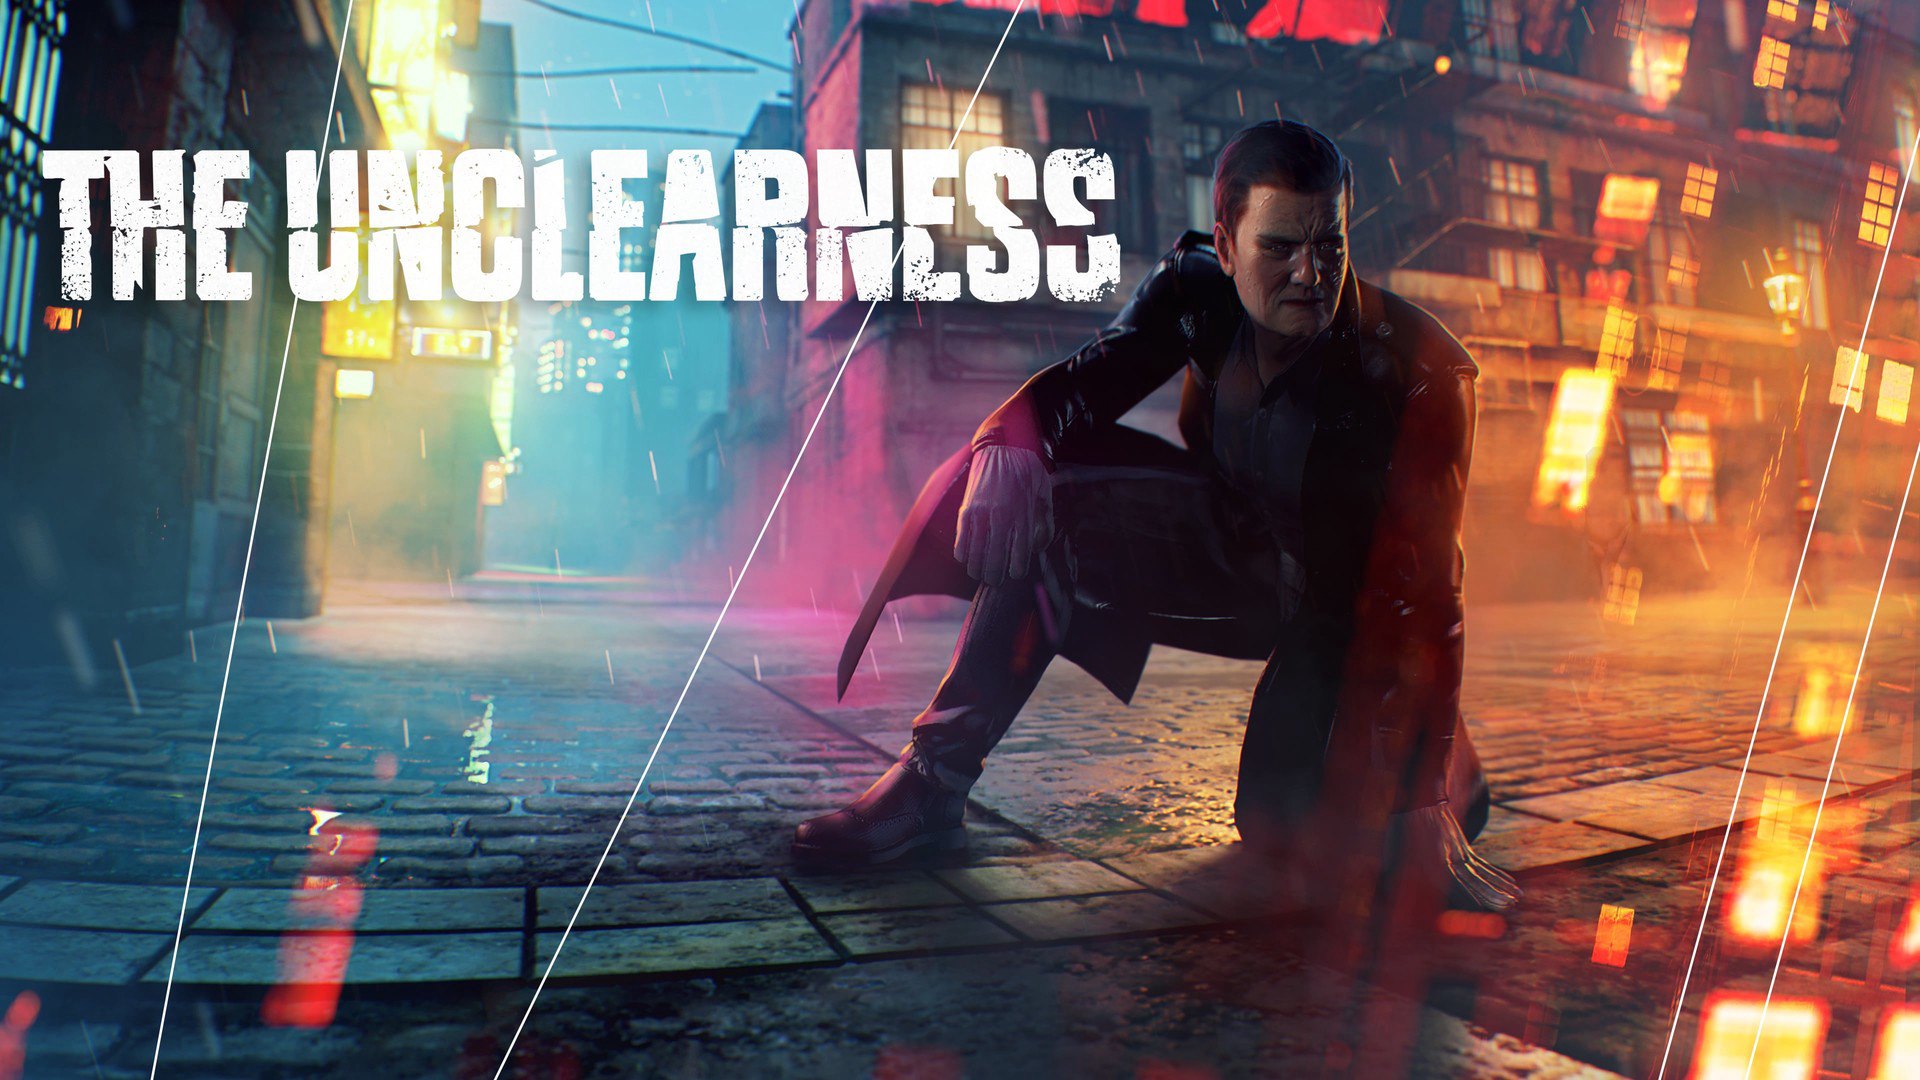 (6.77$) THE UNCLEARNESS Steam CD Key